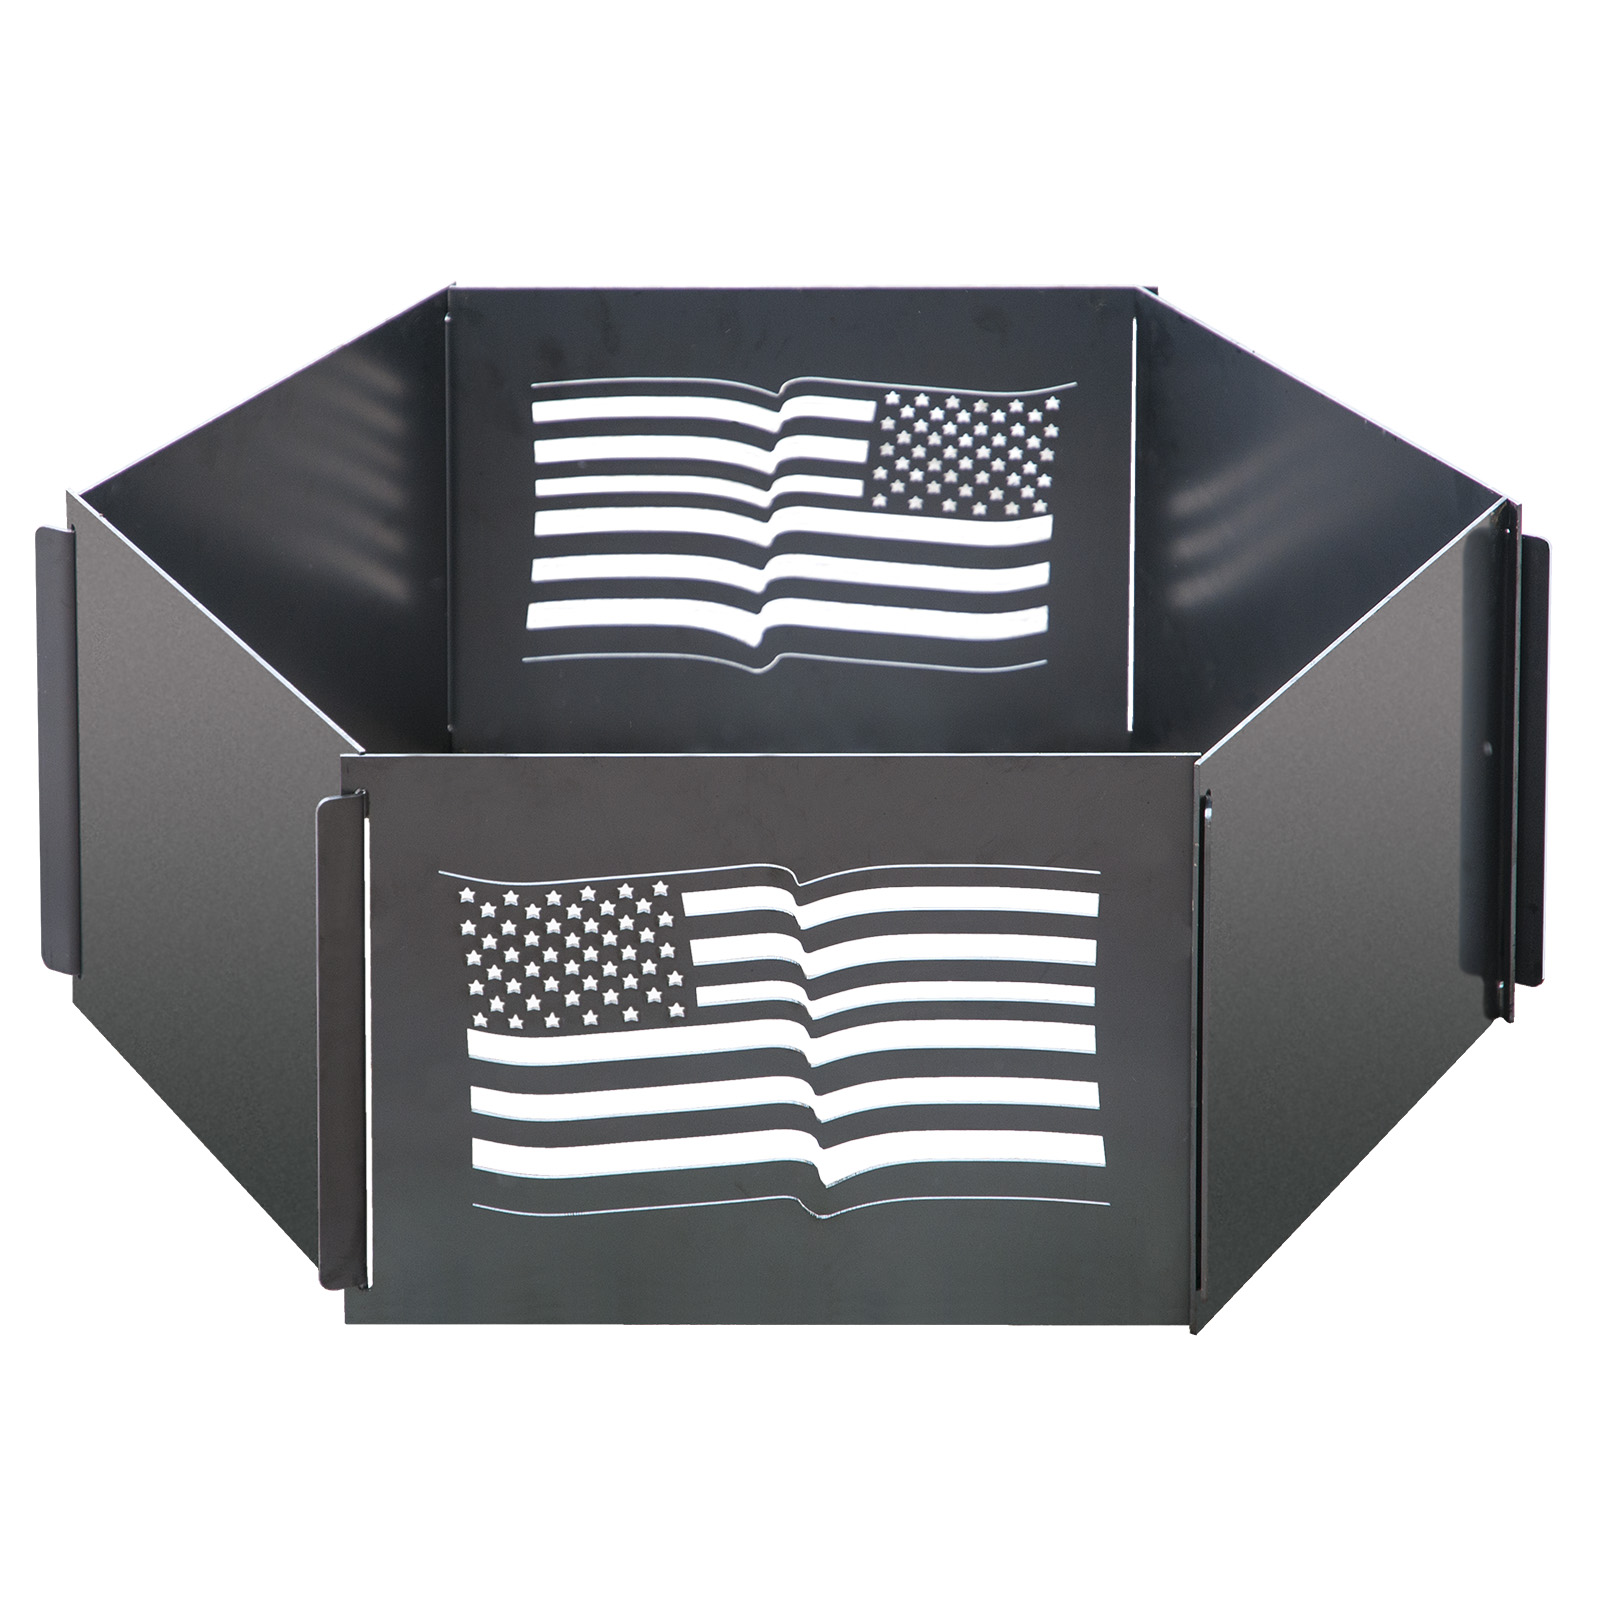 Bottomless Planters & Fire Rings Product categories Behlen Country